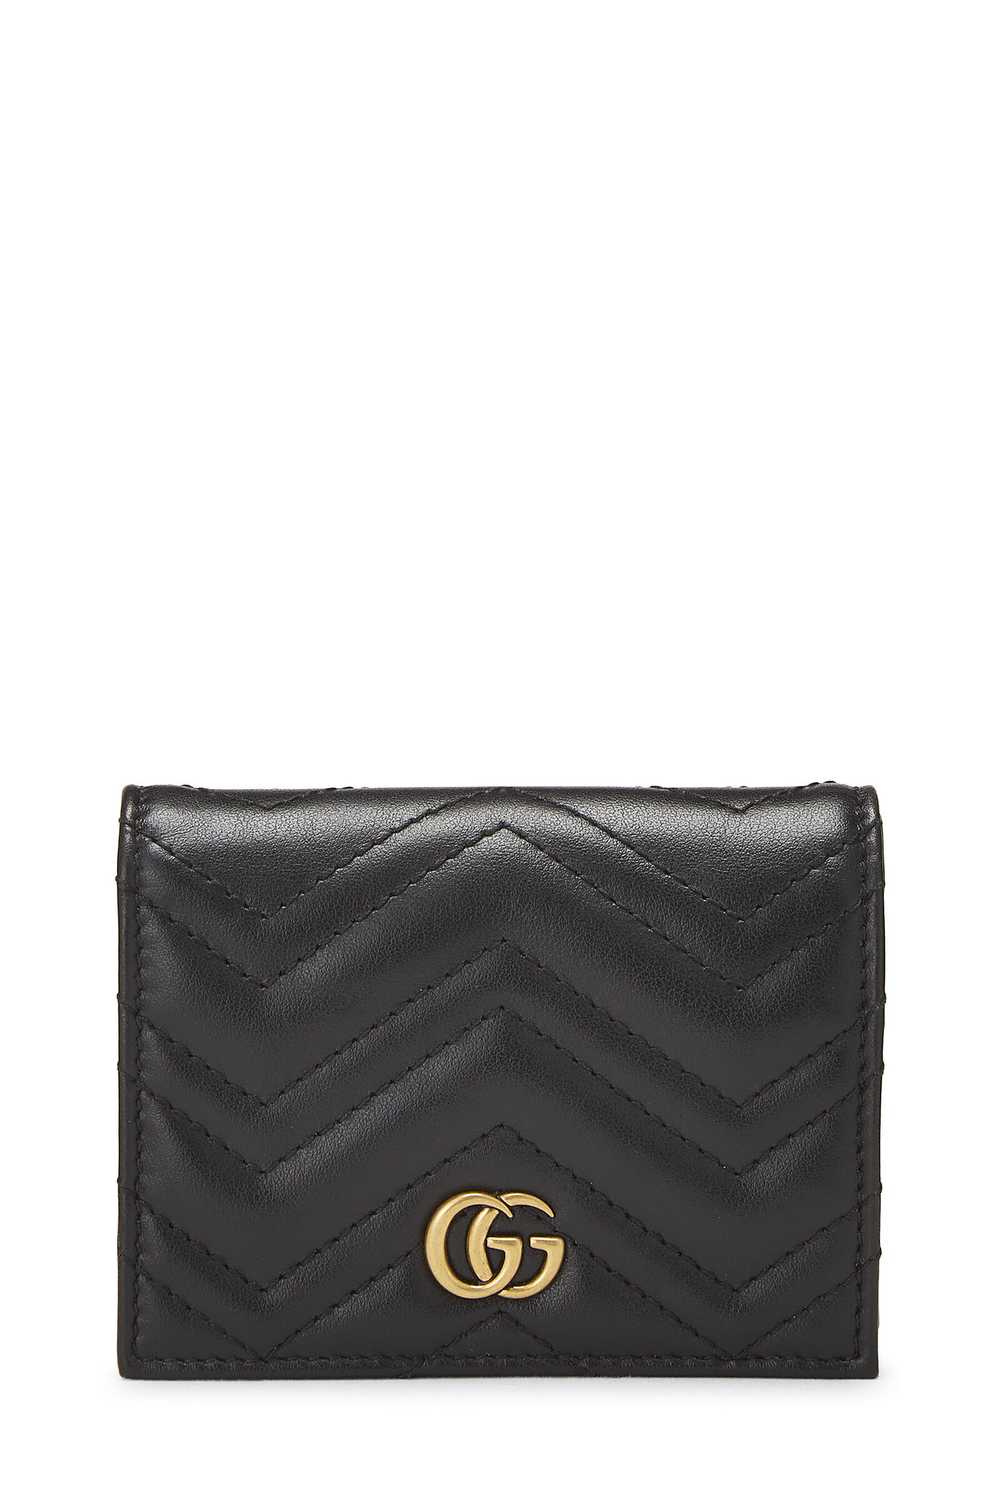 Black Leather Marmont Card Case - image 1